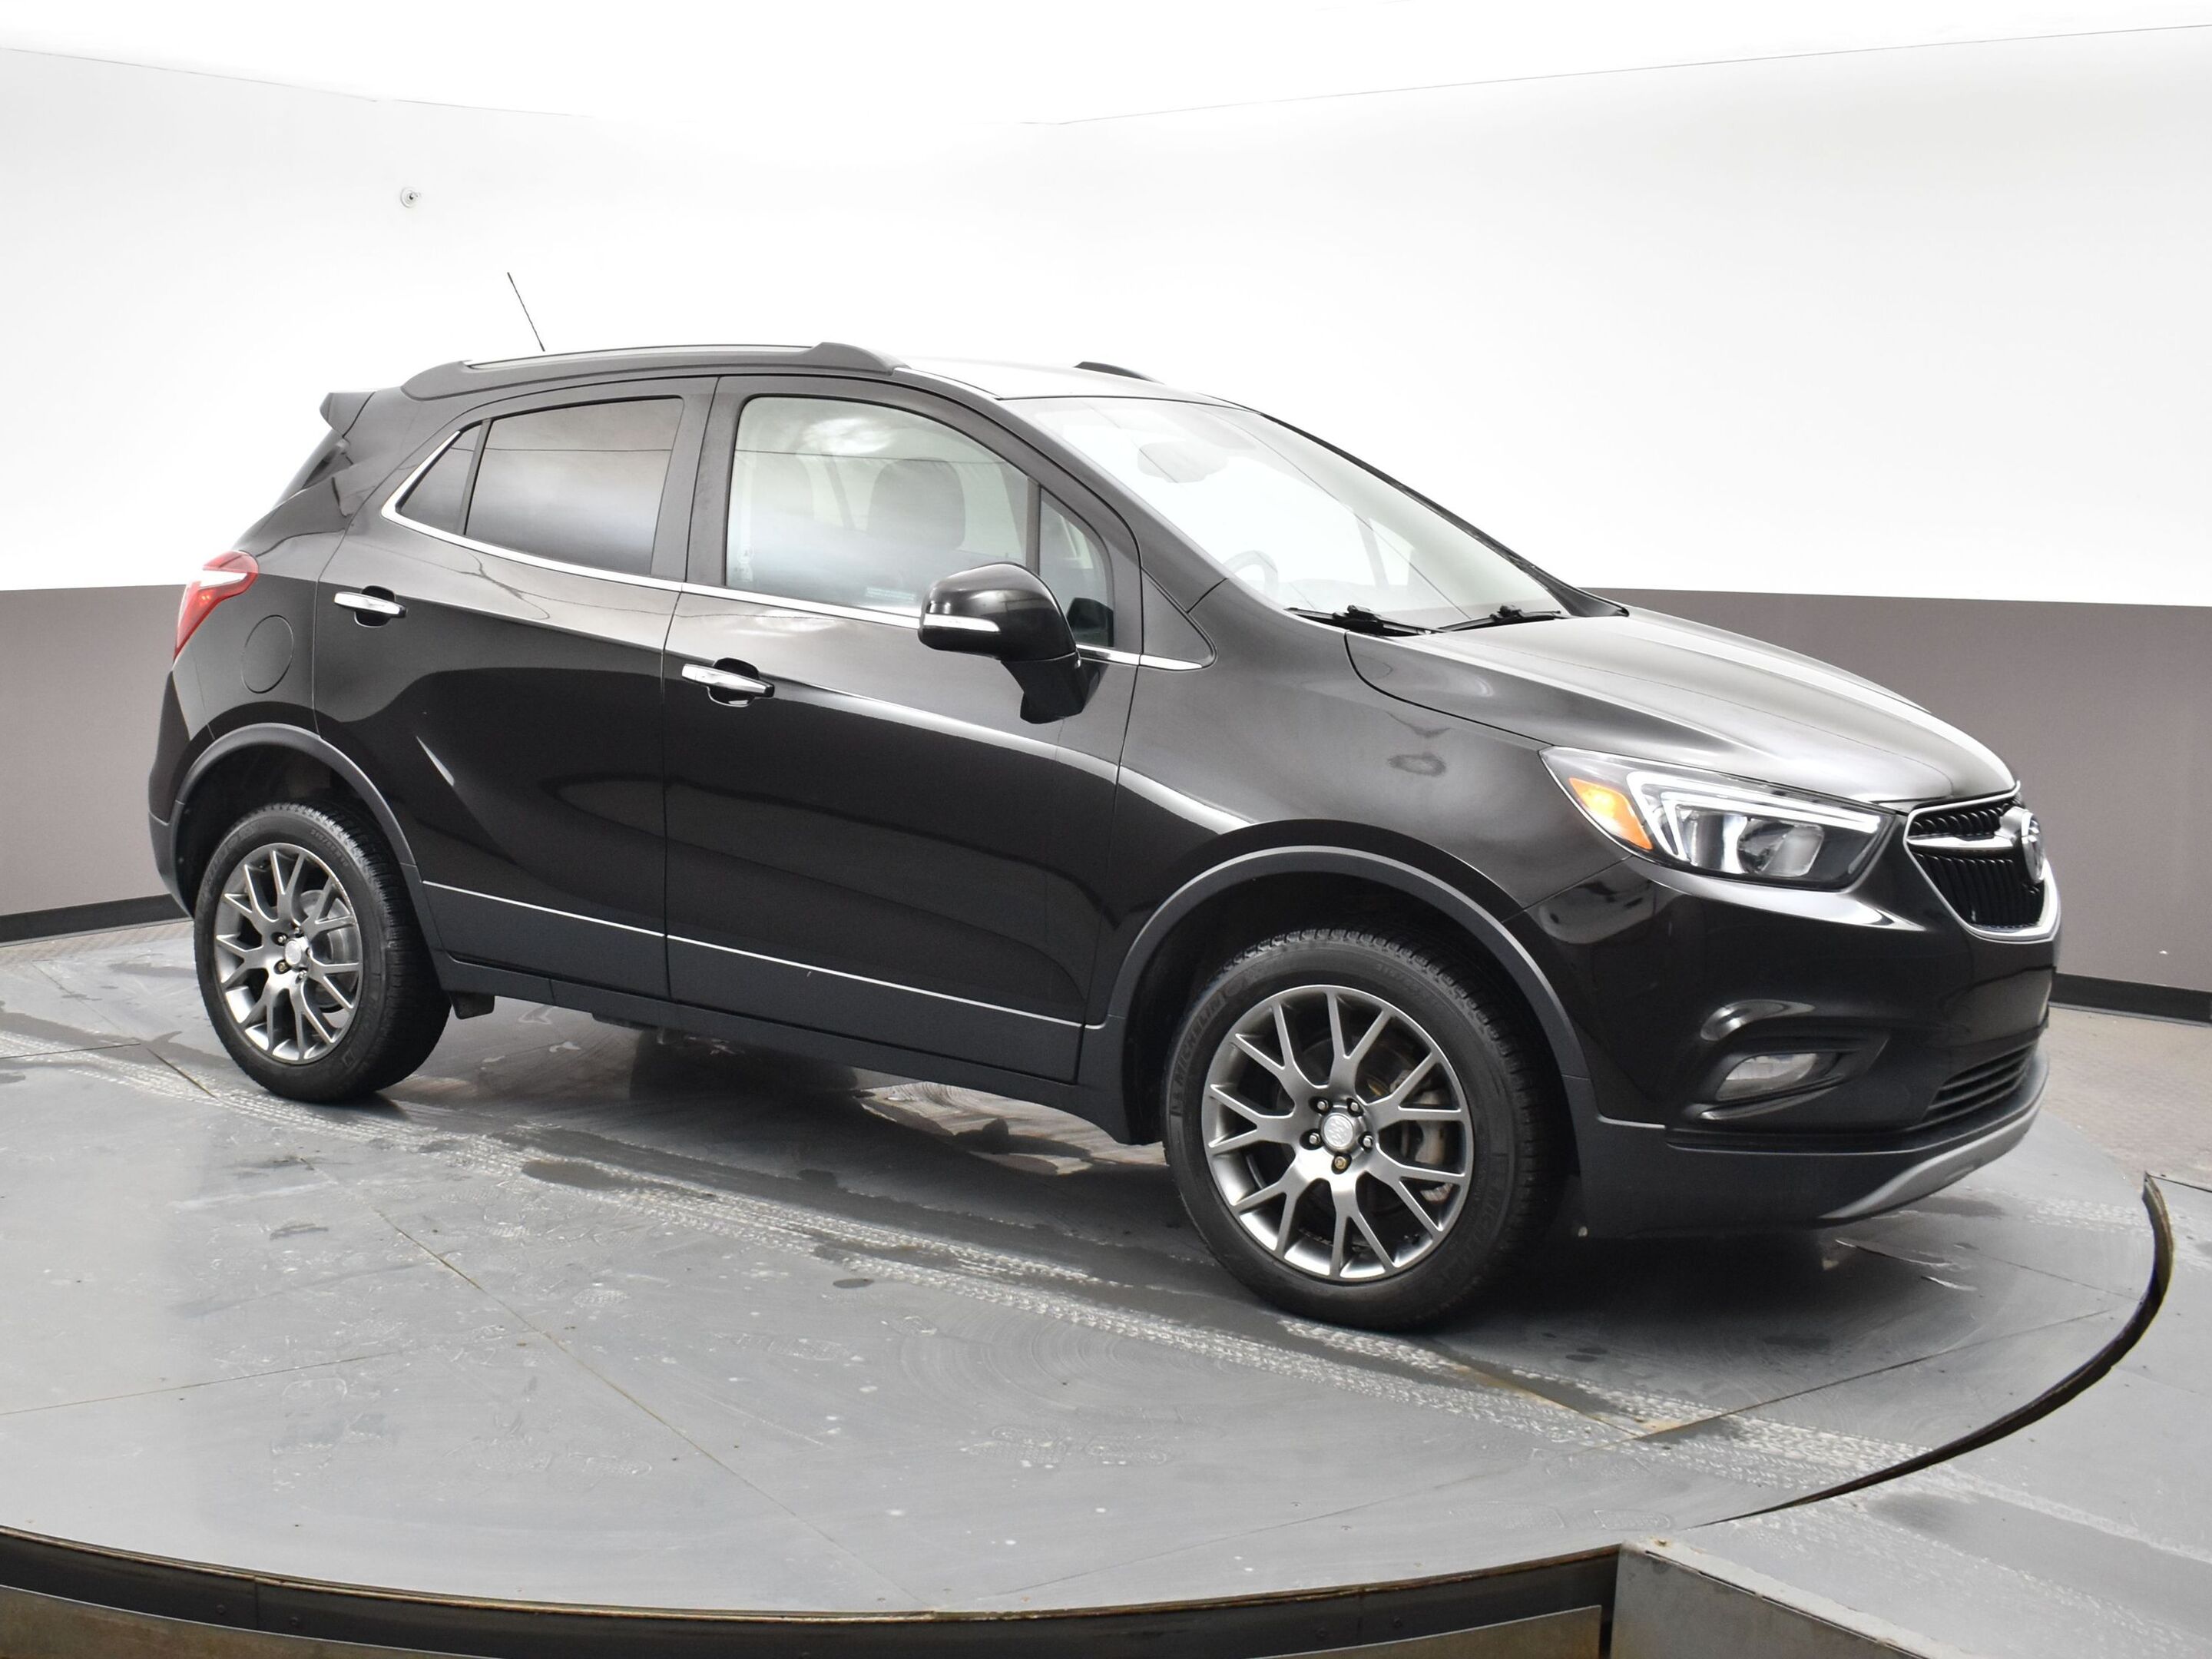 2019 Buick Encore PREFERRED AWD Low KM one owner lease return fuel e